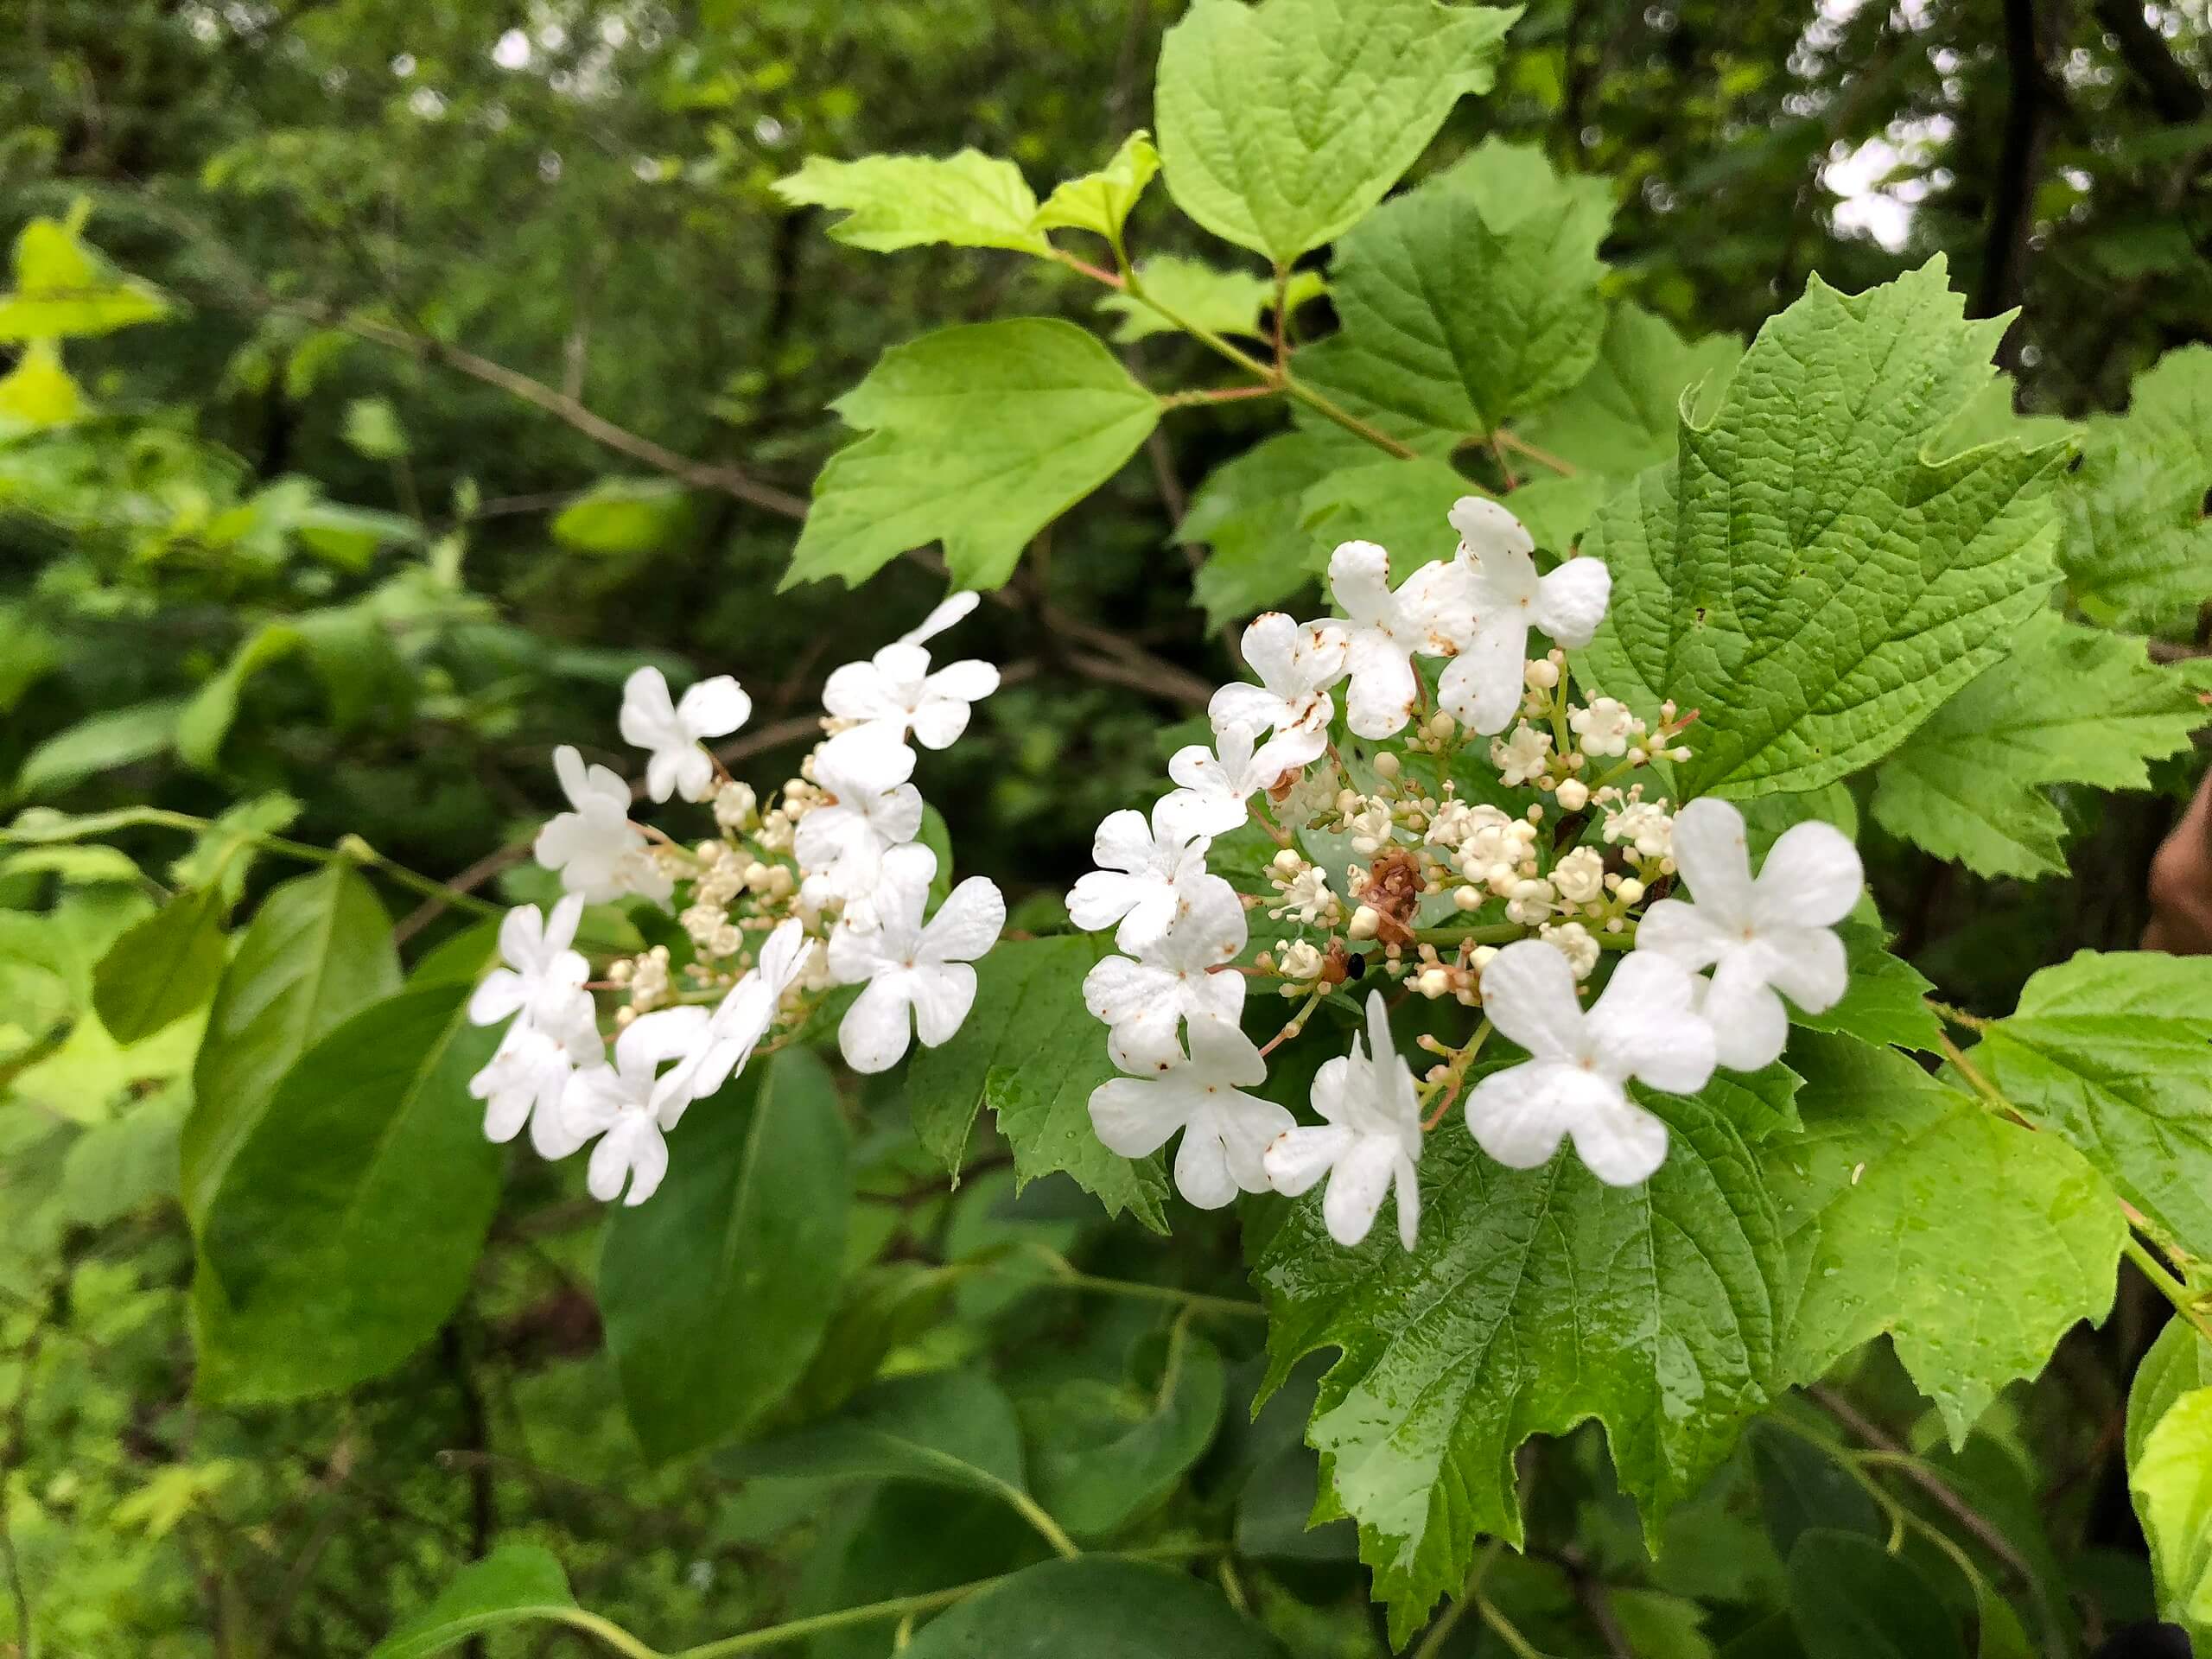 Two clusters of delicate white flowers blooming on the American Cranberrybush